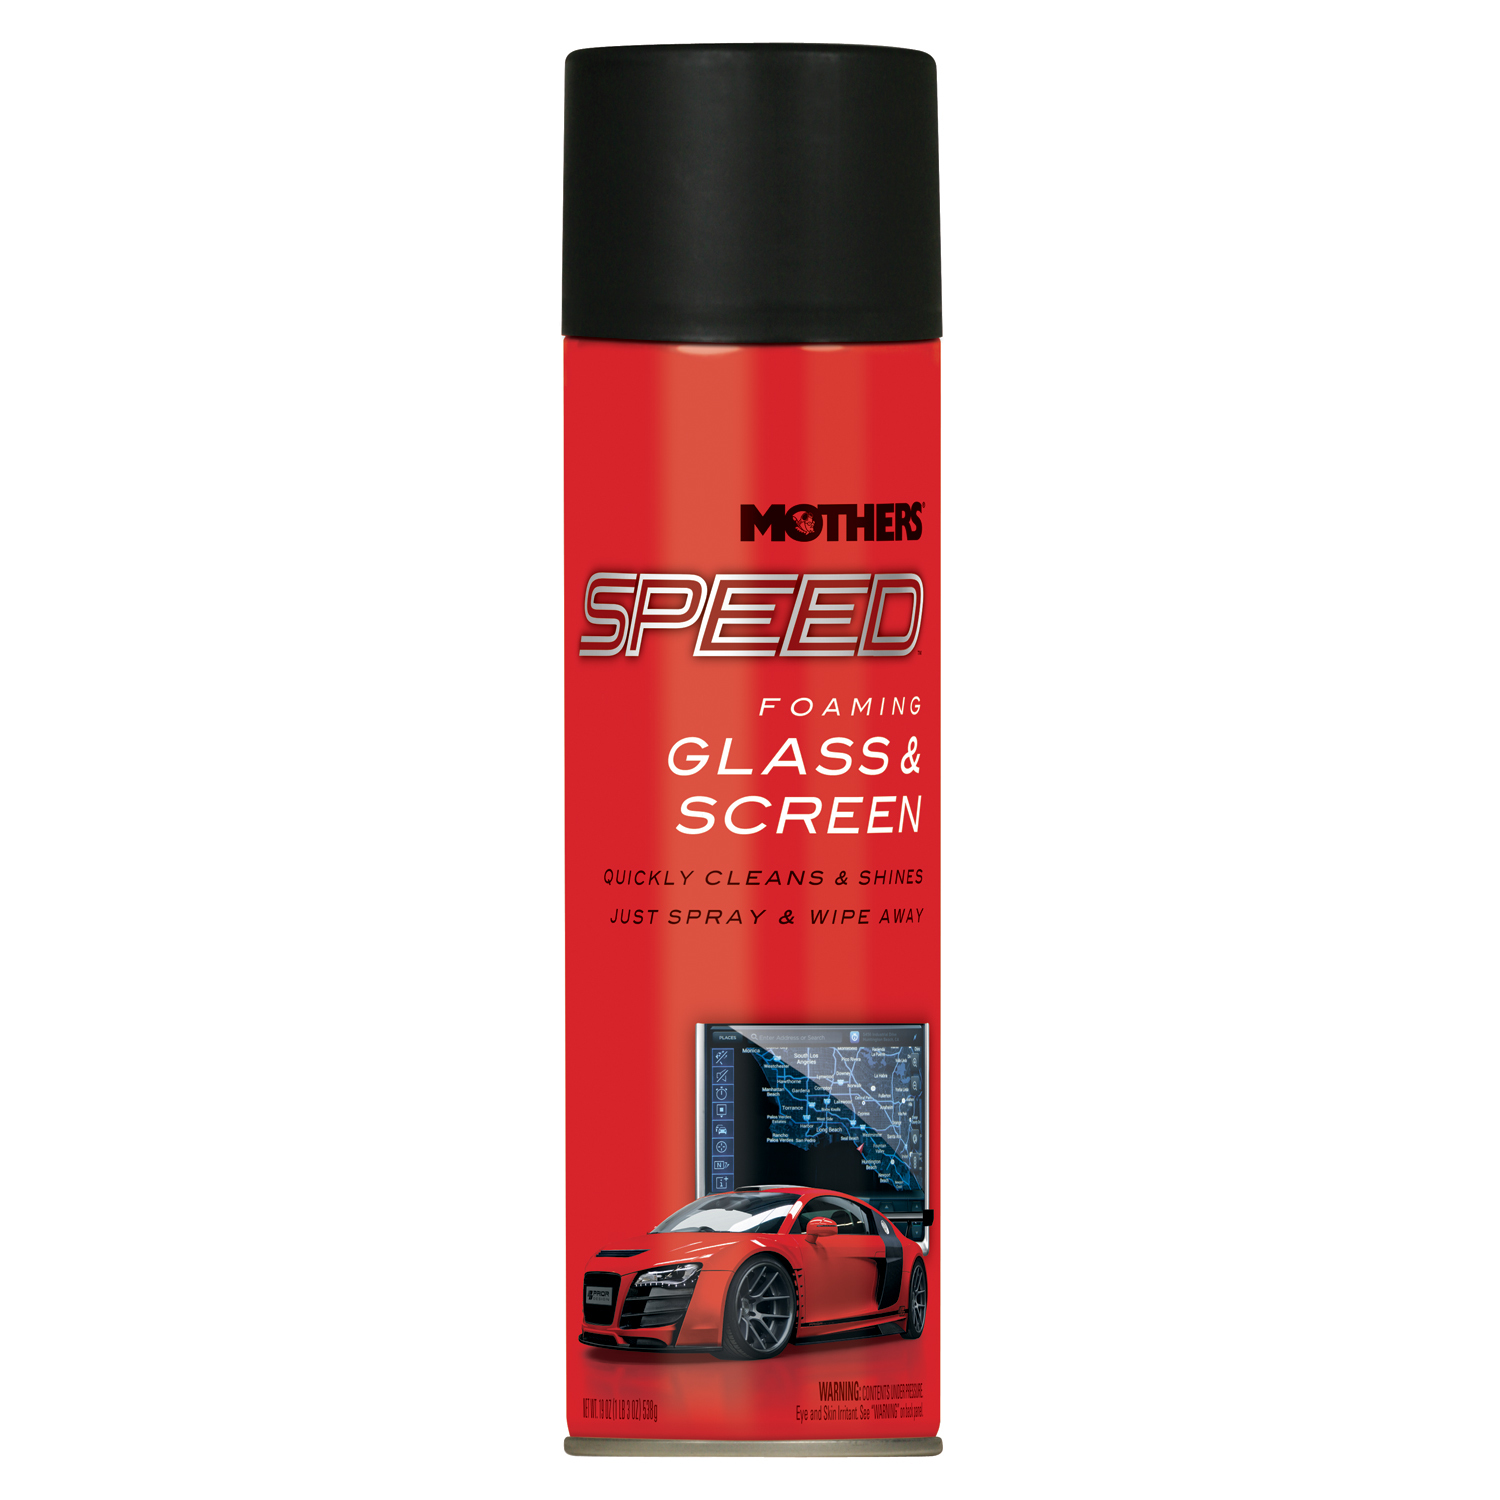 MOTHERS Window Cleaner, Speed Foaming Glass and Screen Cleaner, Aerosol, 19 oz, Each